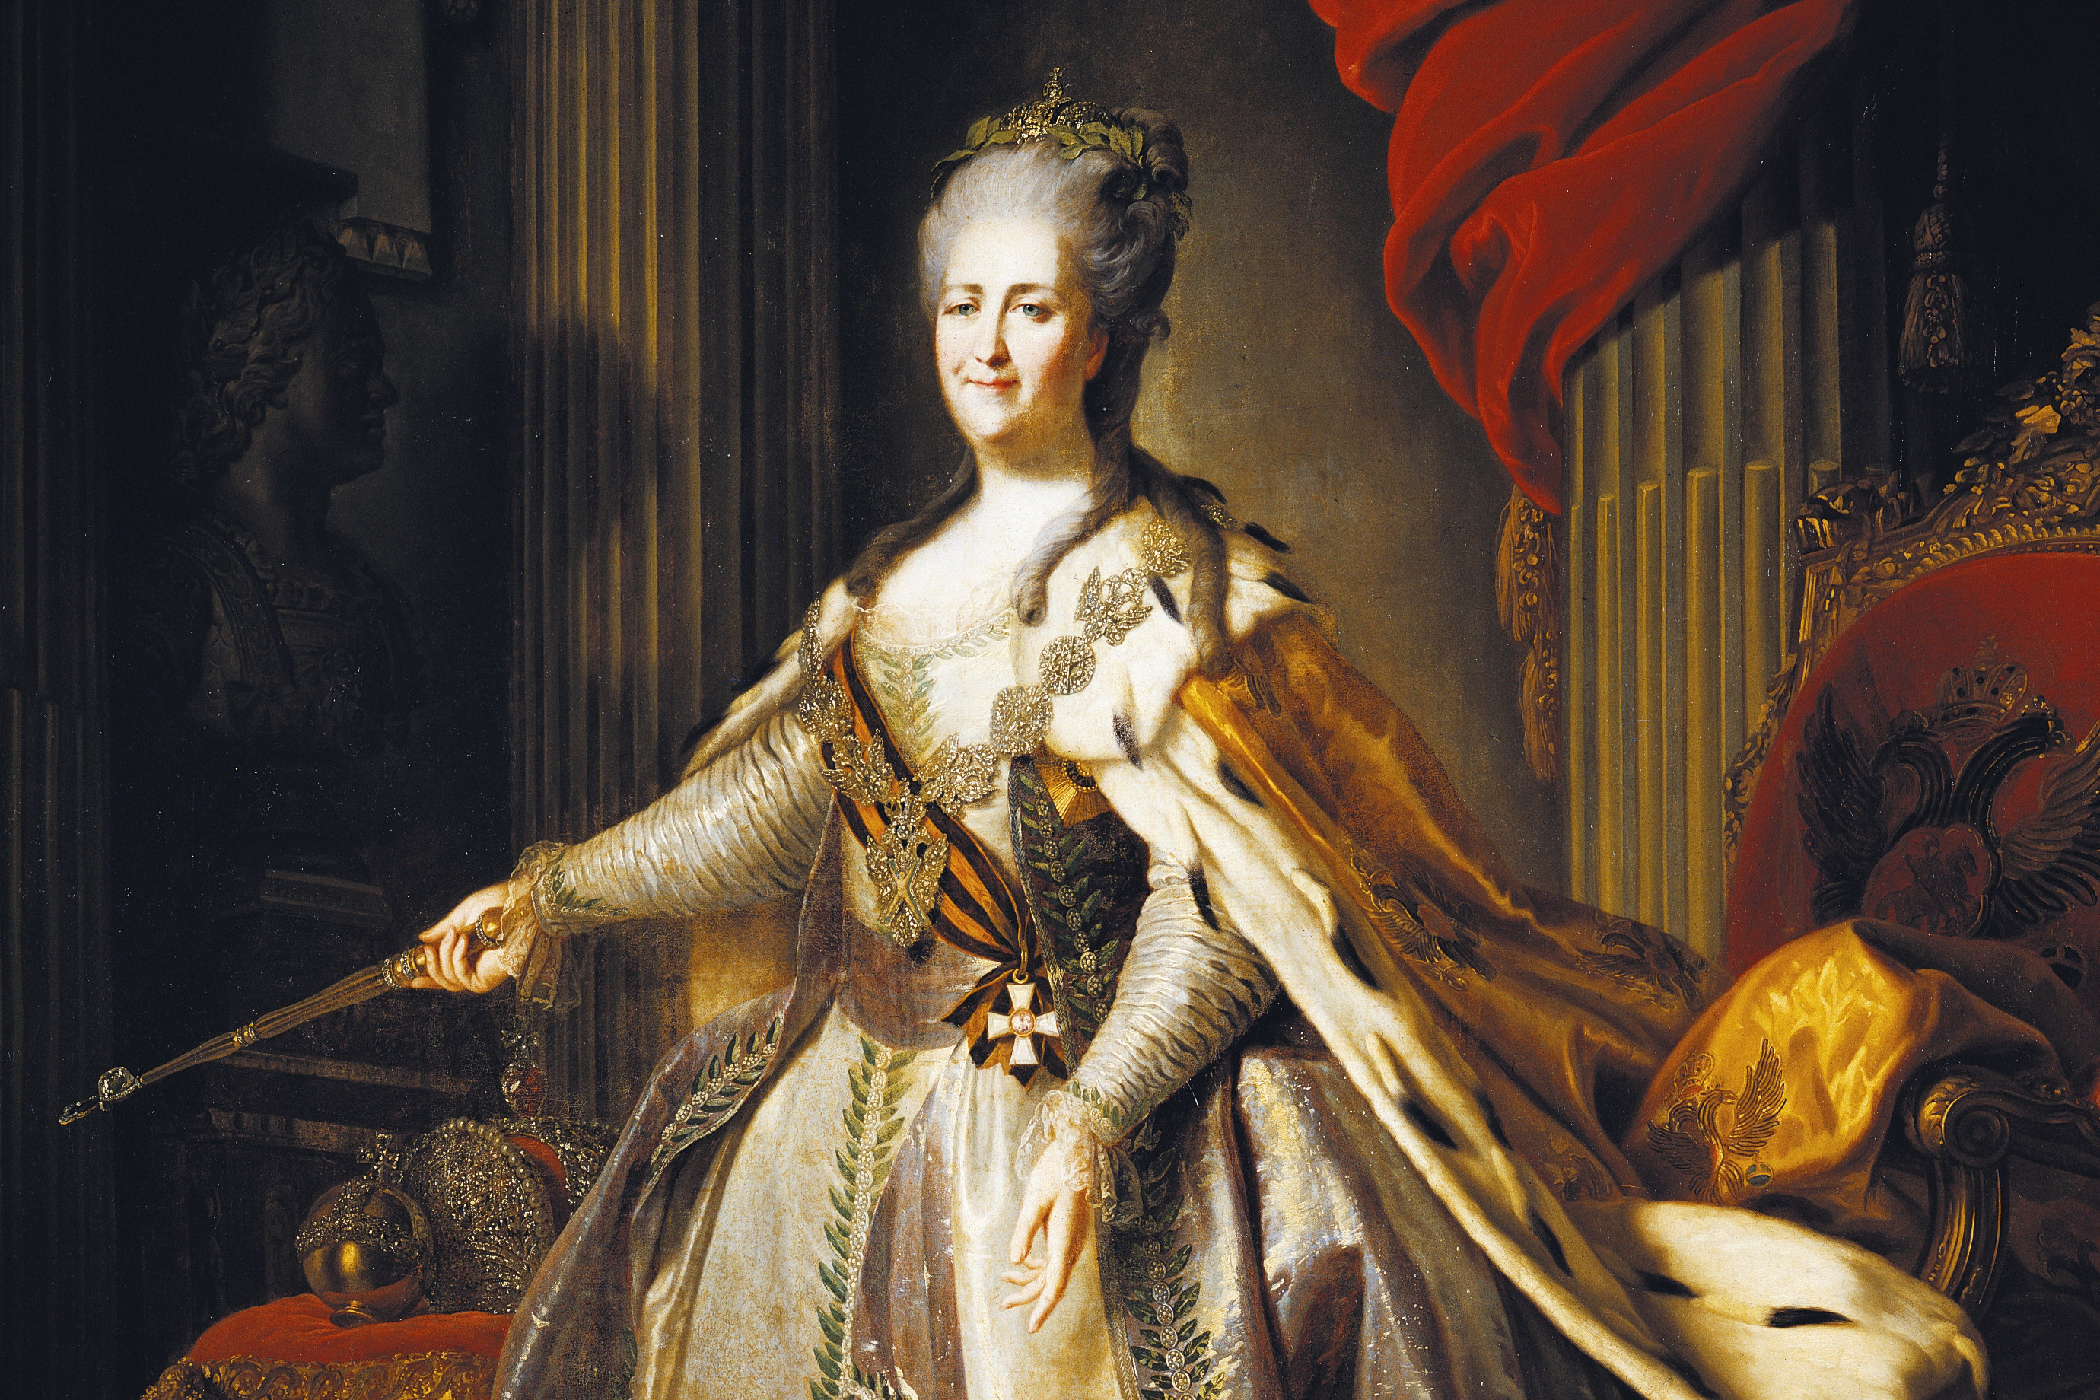 Portrait of Catherine II, also known as Catherine the Great (Stettin, 1729-Pushkin, 1796), Empress consort of Peter III of Russia (1728-1762), painting by Fyodor Rokotov (1735 or 1736-1808), ca 1770